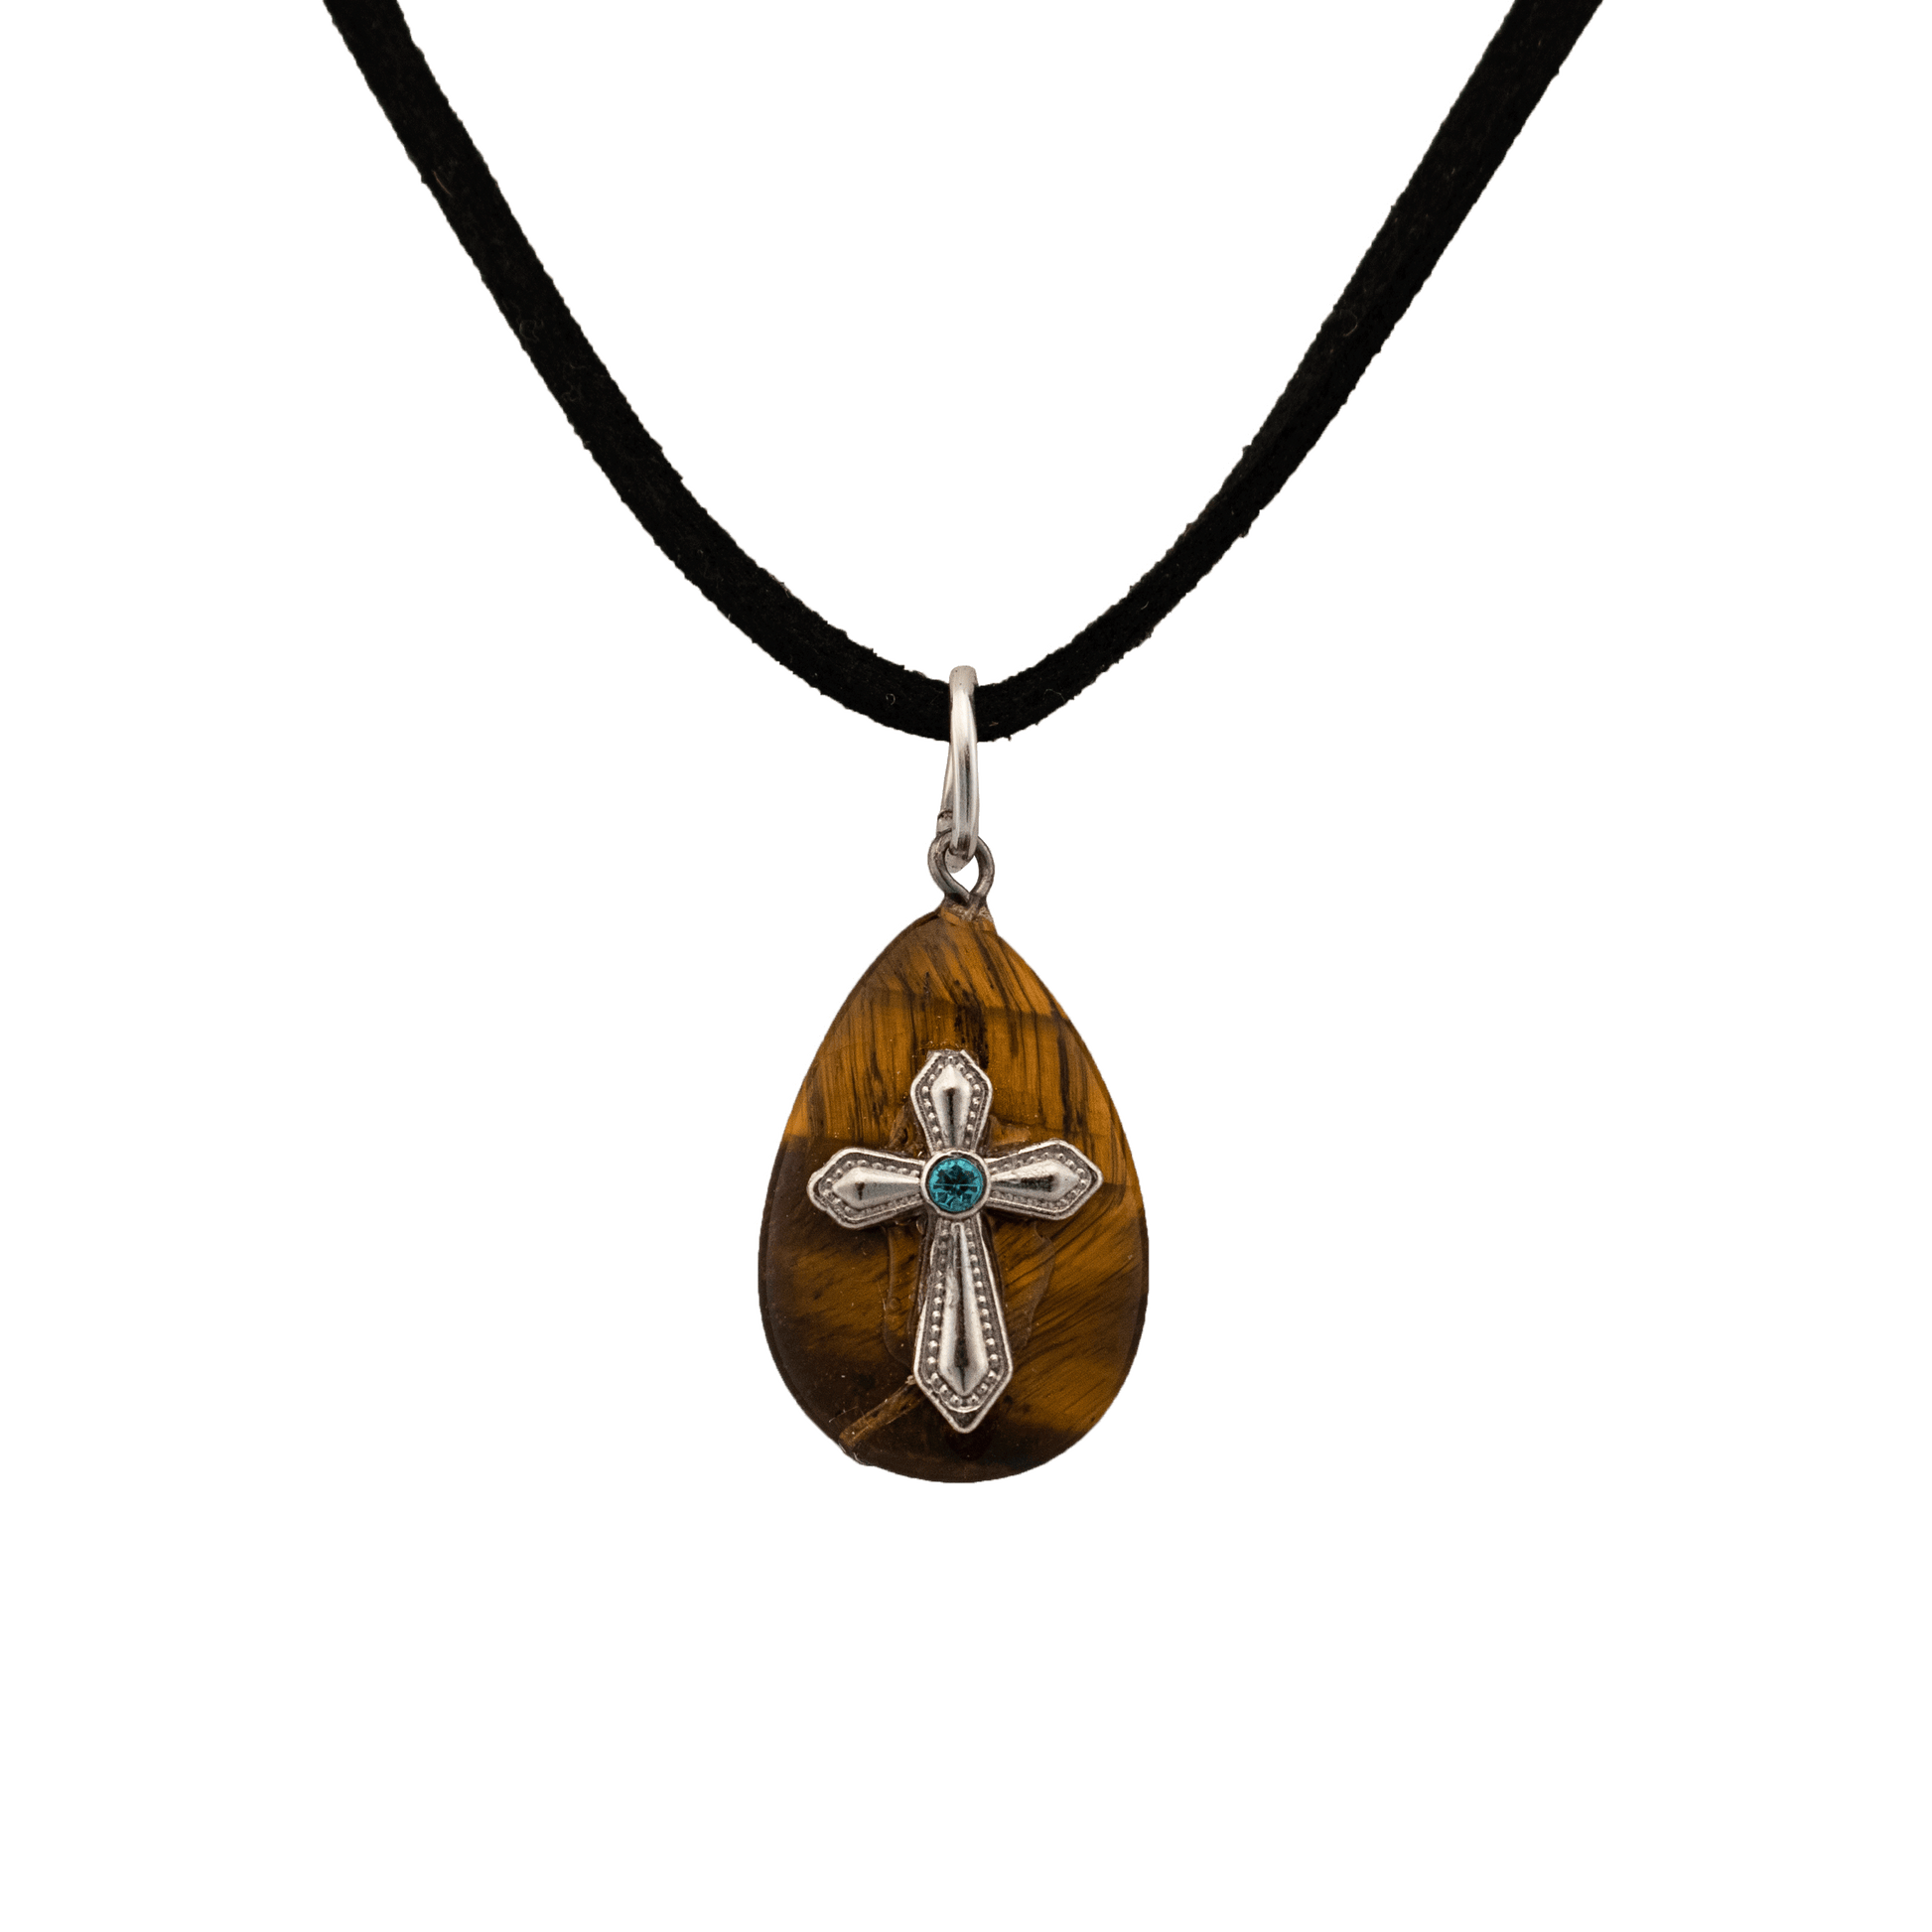 Teardrop Tigers Eye pendant with silver cross centered on it and blue jewel on a black cord